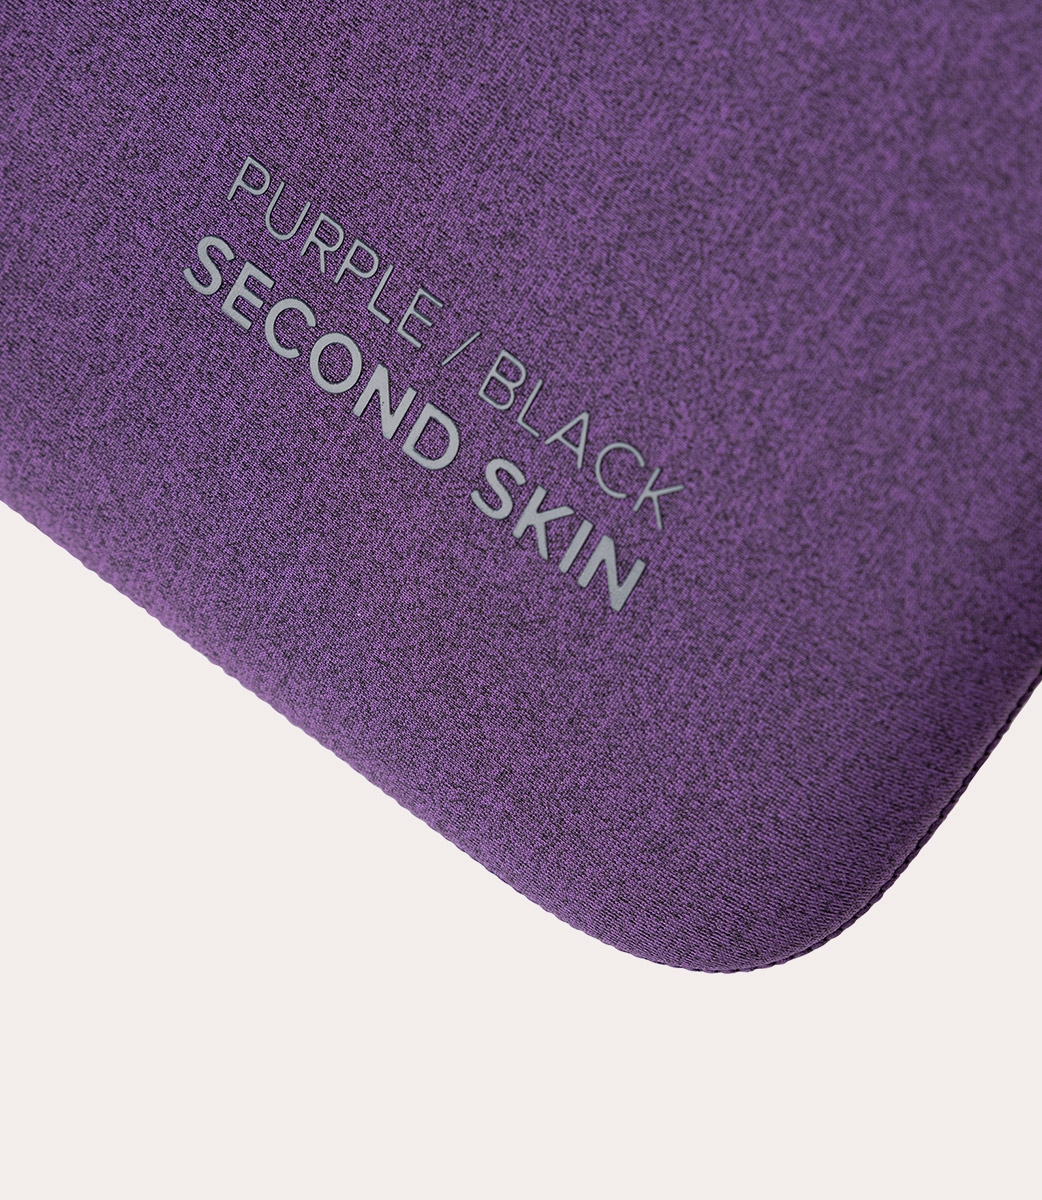 Tucano - Stretchy case made with material Colors Purple